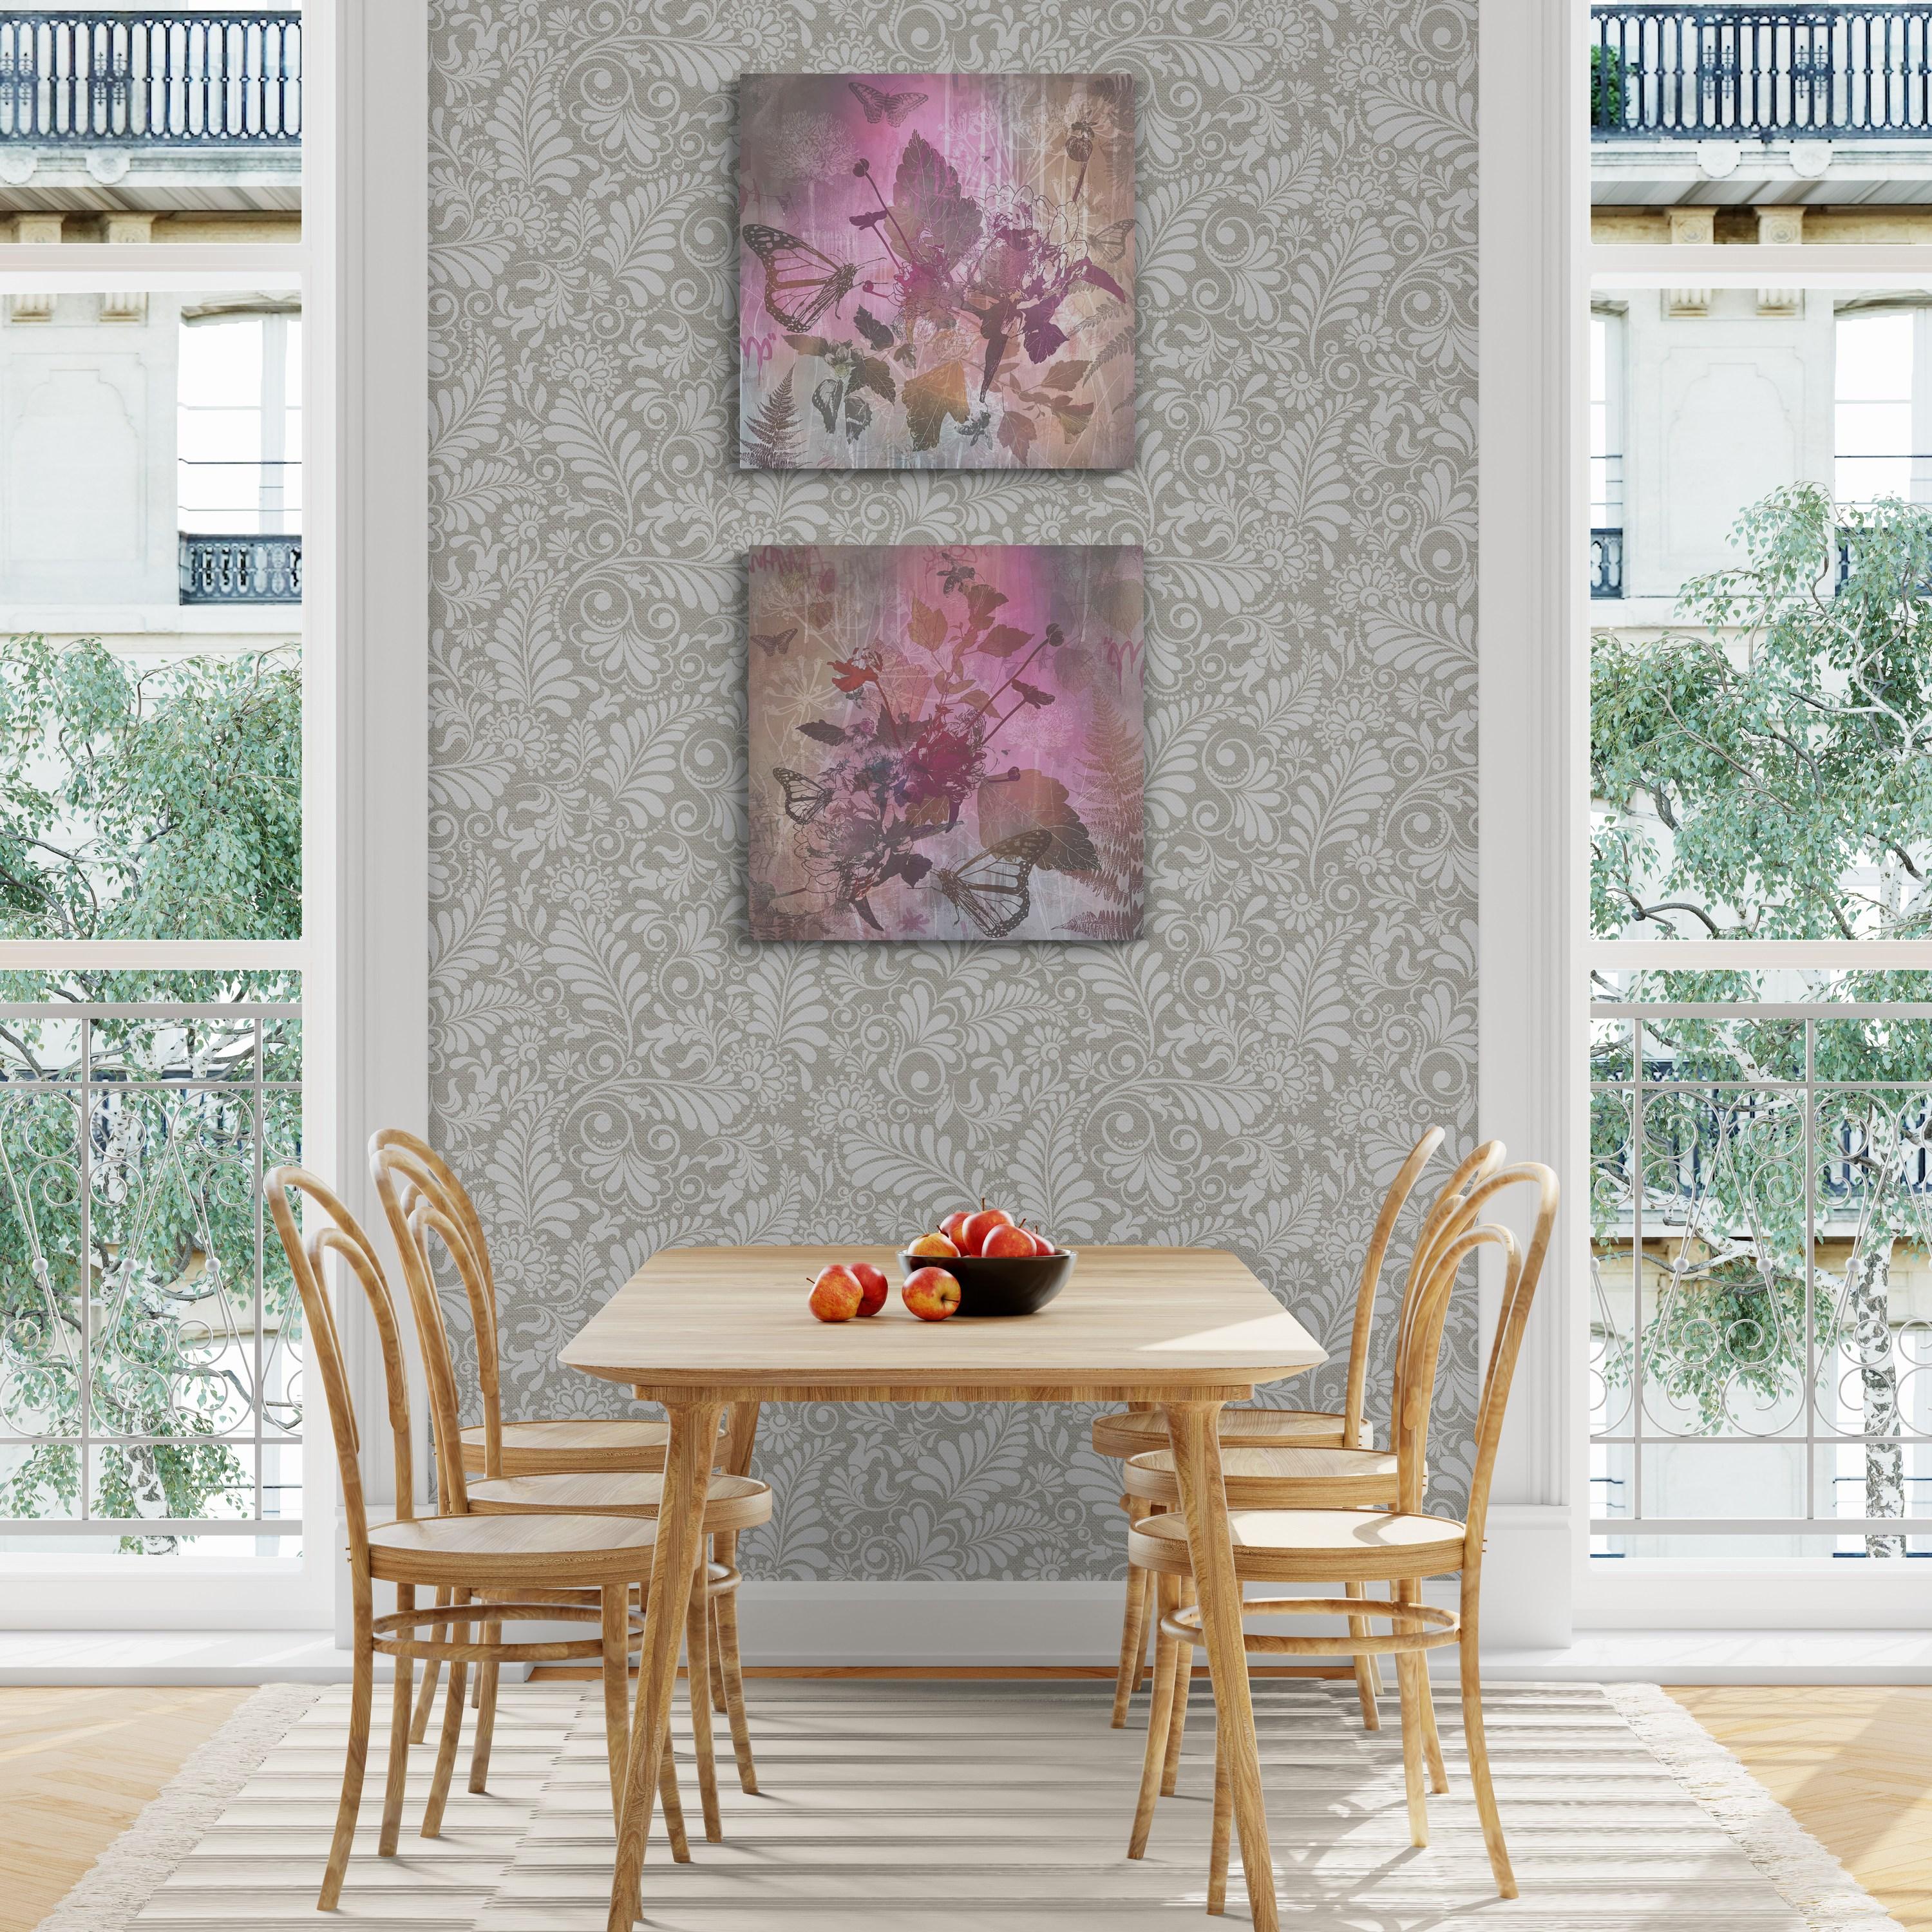 Morning Glory Diptych (Bees, Birch Panel, Botanicals, Butterflies, Floral, Gold) For Sale 5